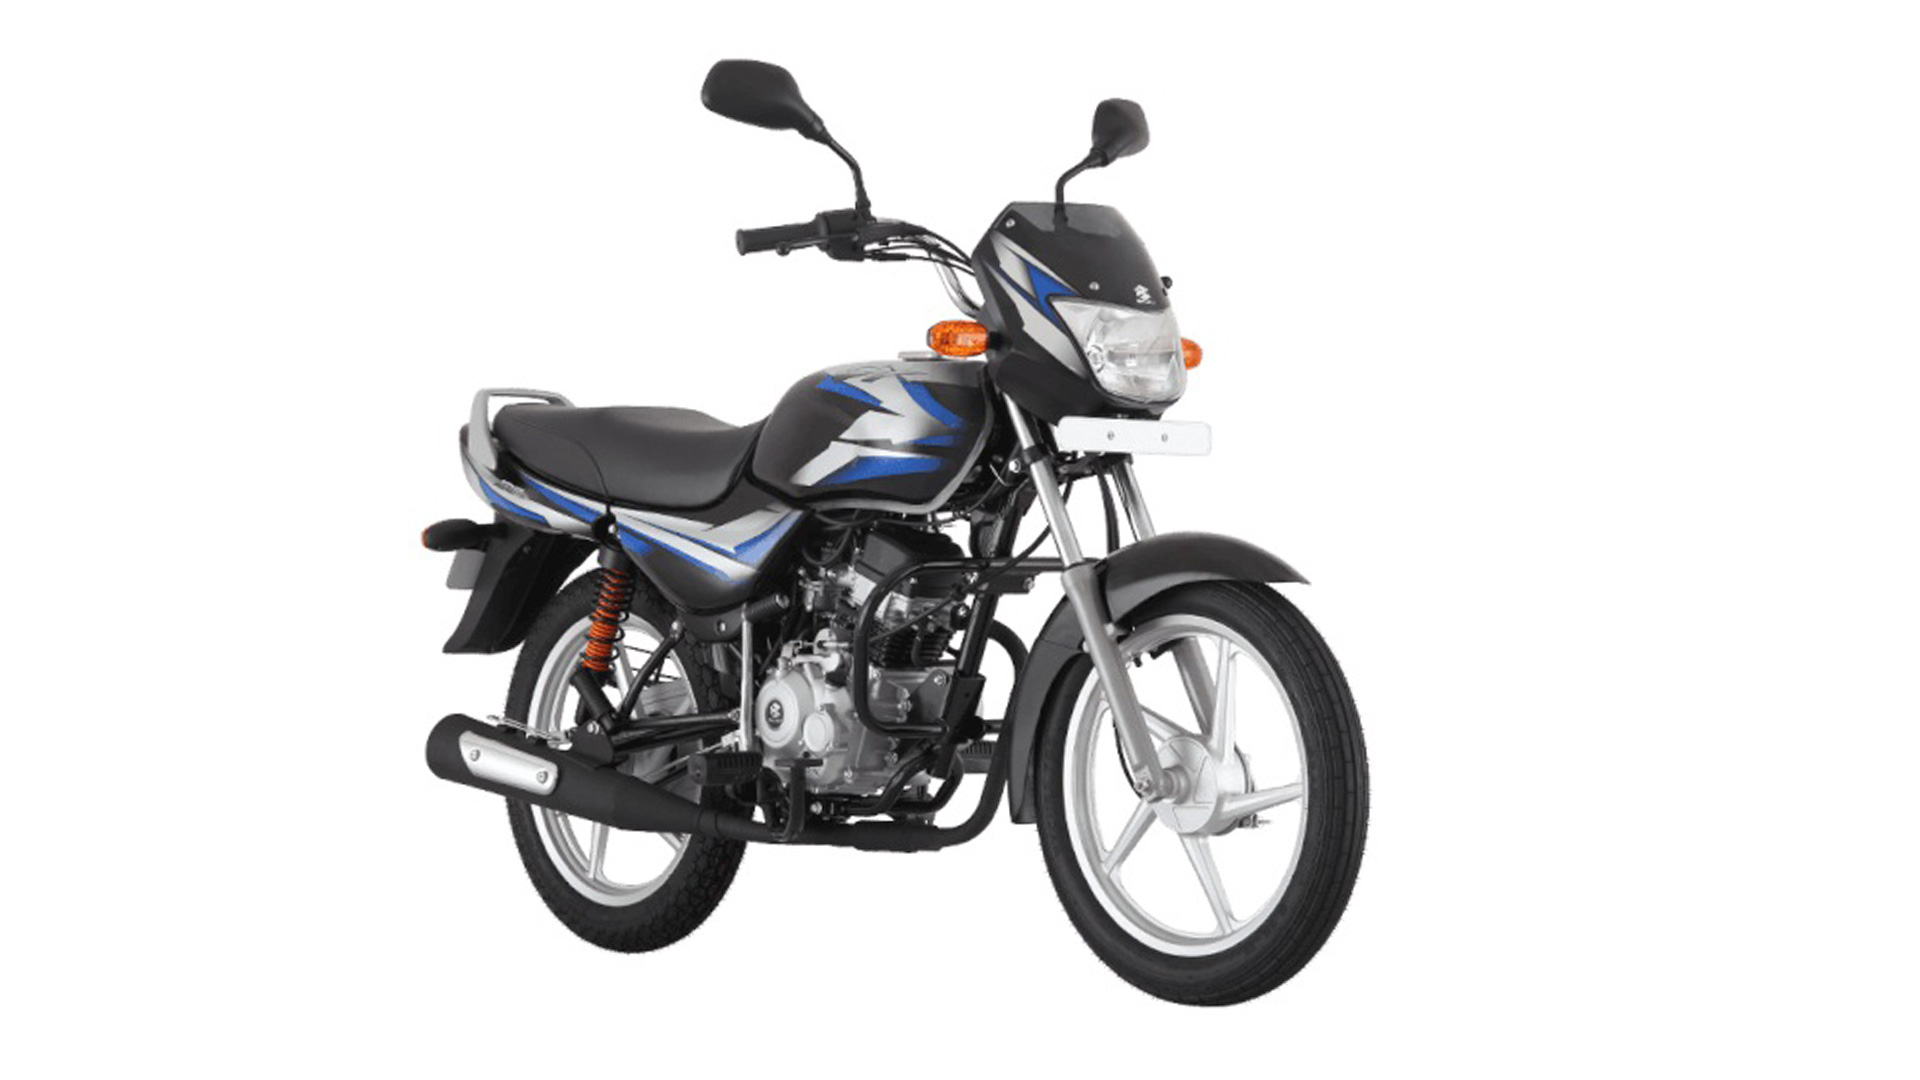 Bajaj Ct 100 17 Es Price Mileage Reviews Specification Gallery Overdrive